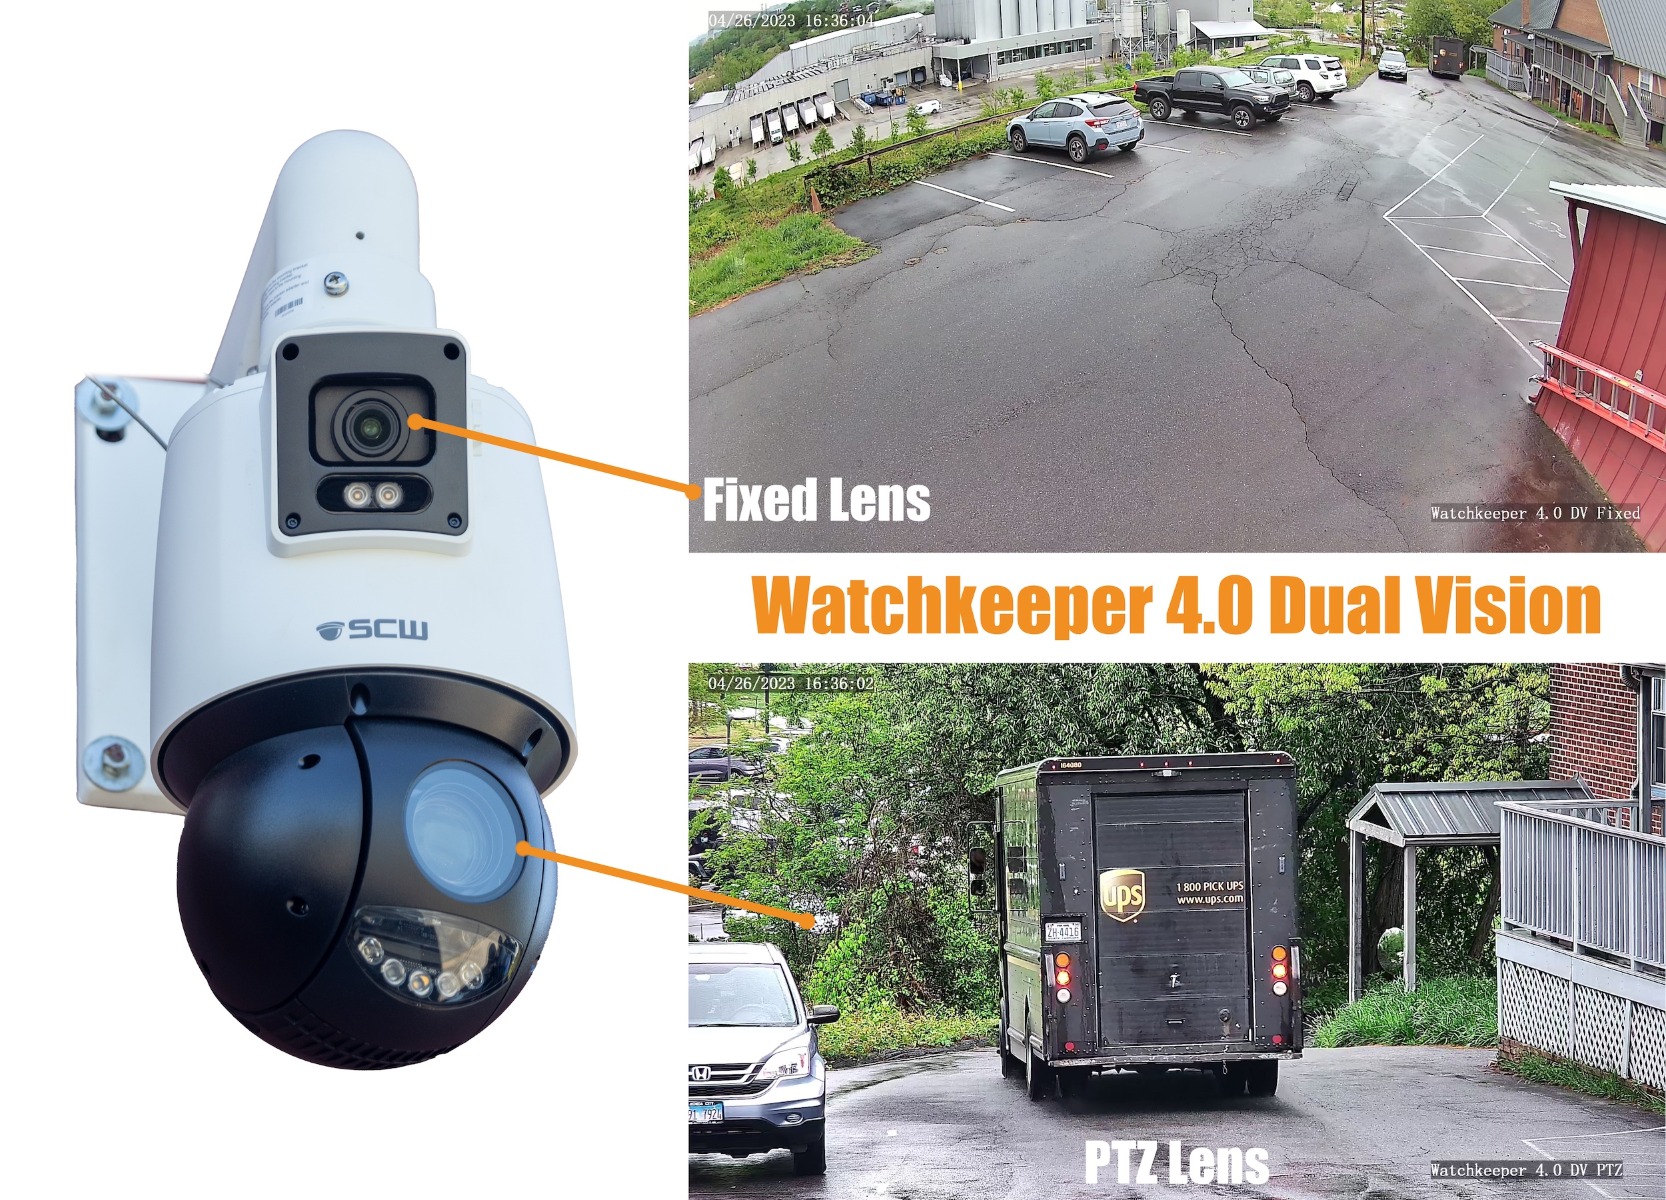 The Watchkeeper 4.0 Dual Vision PTZ + Fixed Lens Camera